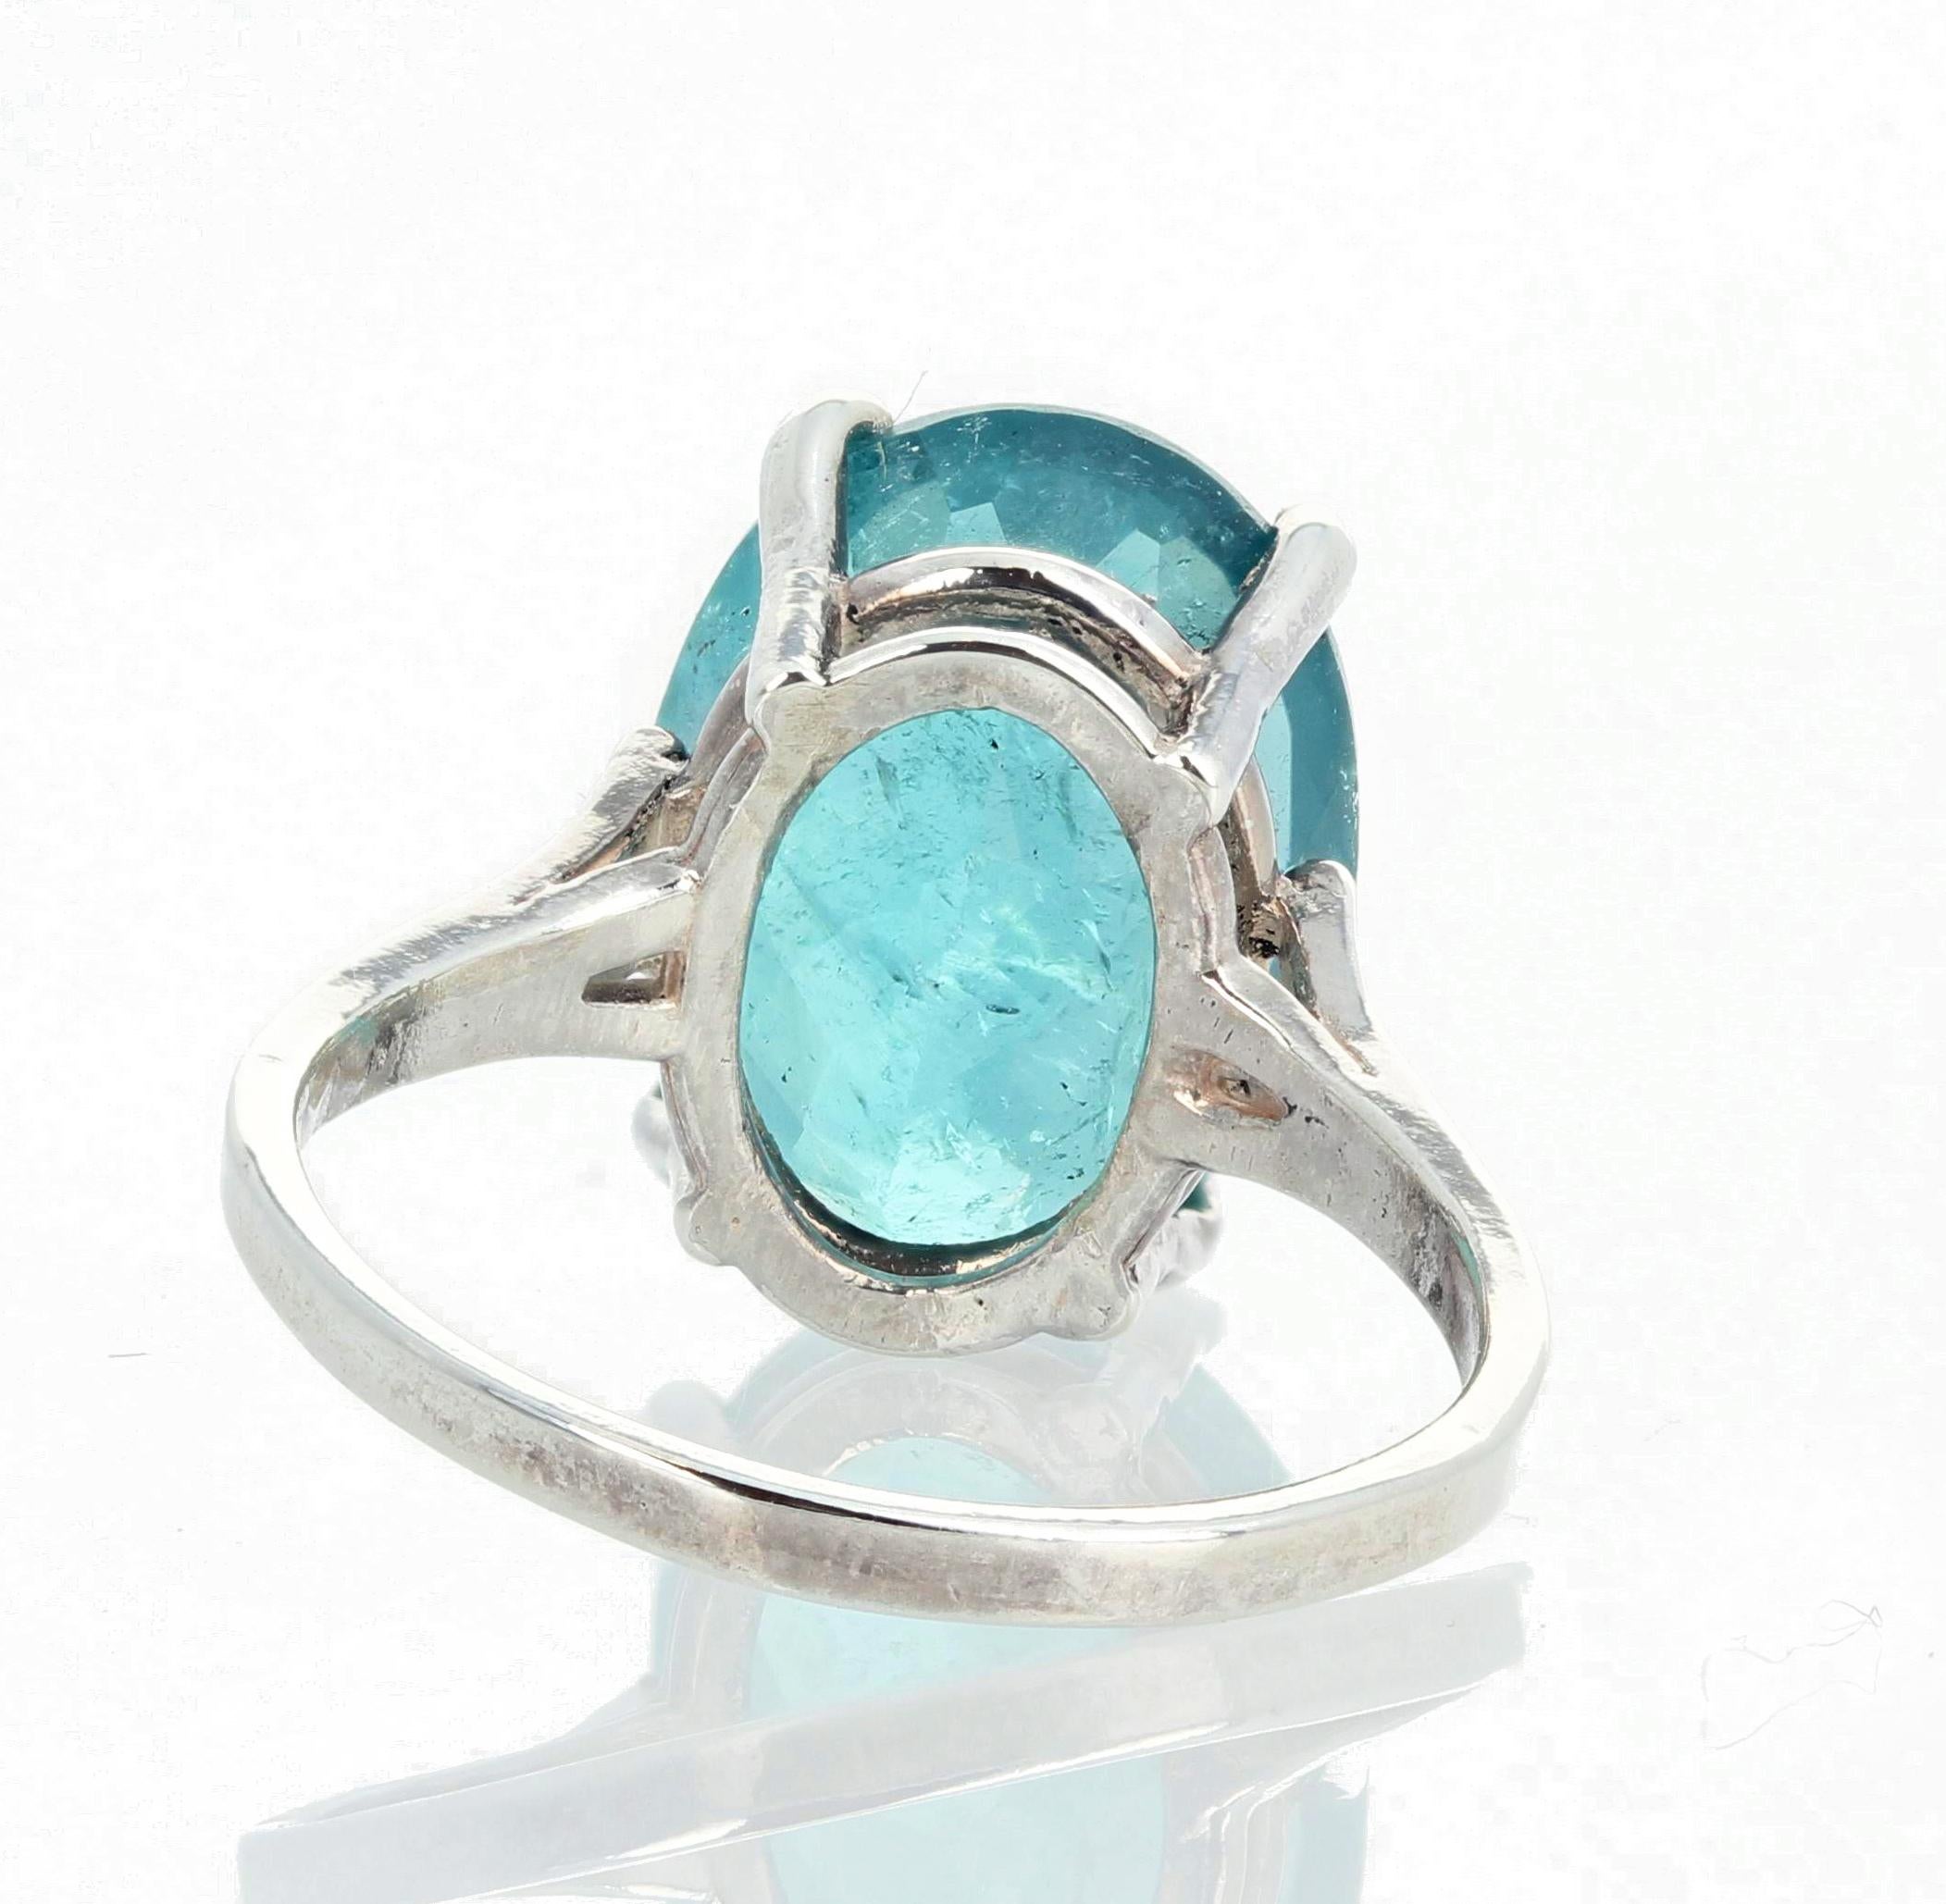 Gemjunky Rare 7.9 Cts Blue Indicolite Tourmaline Sterling Silver Cocktail Ring 2